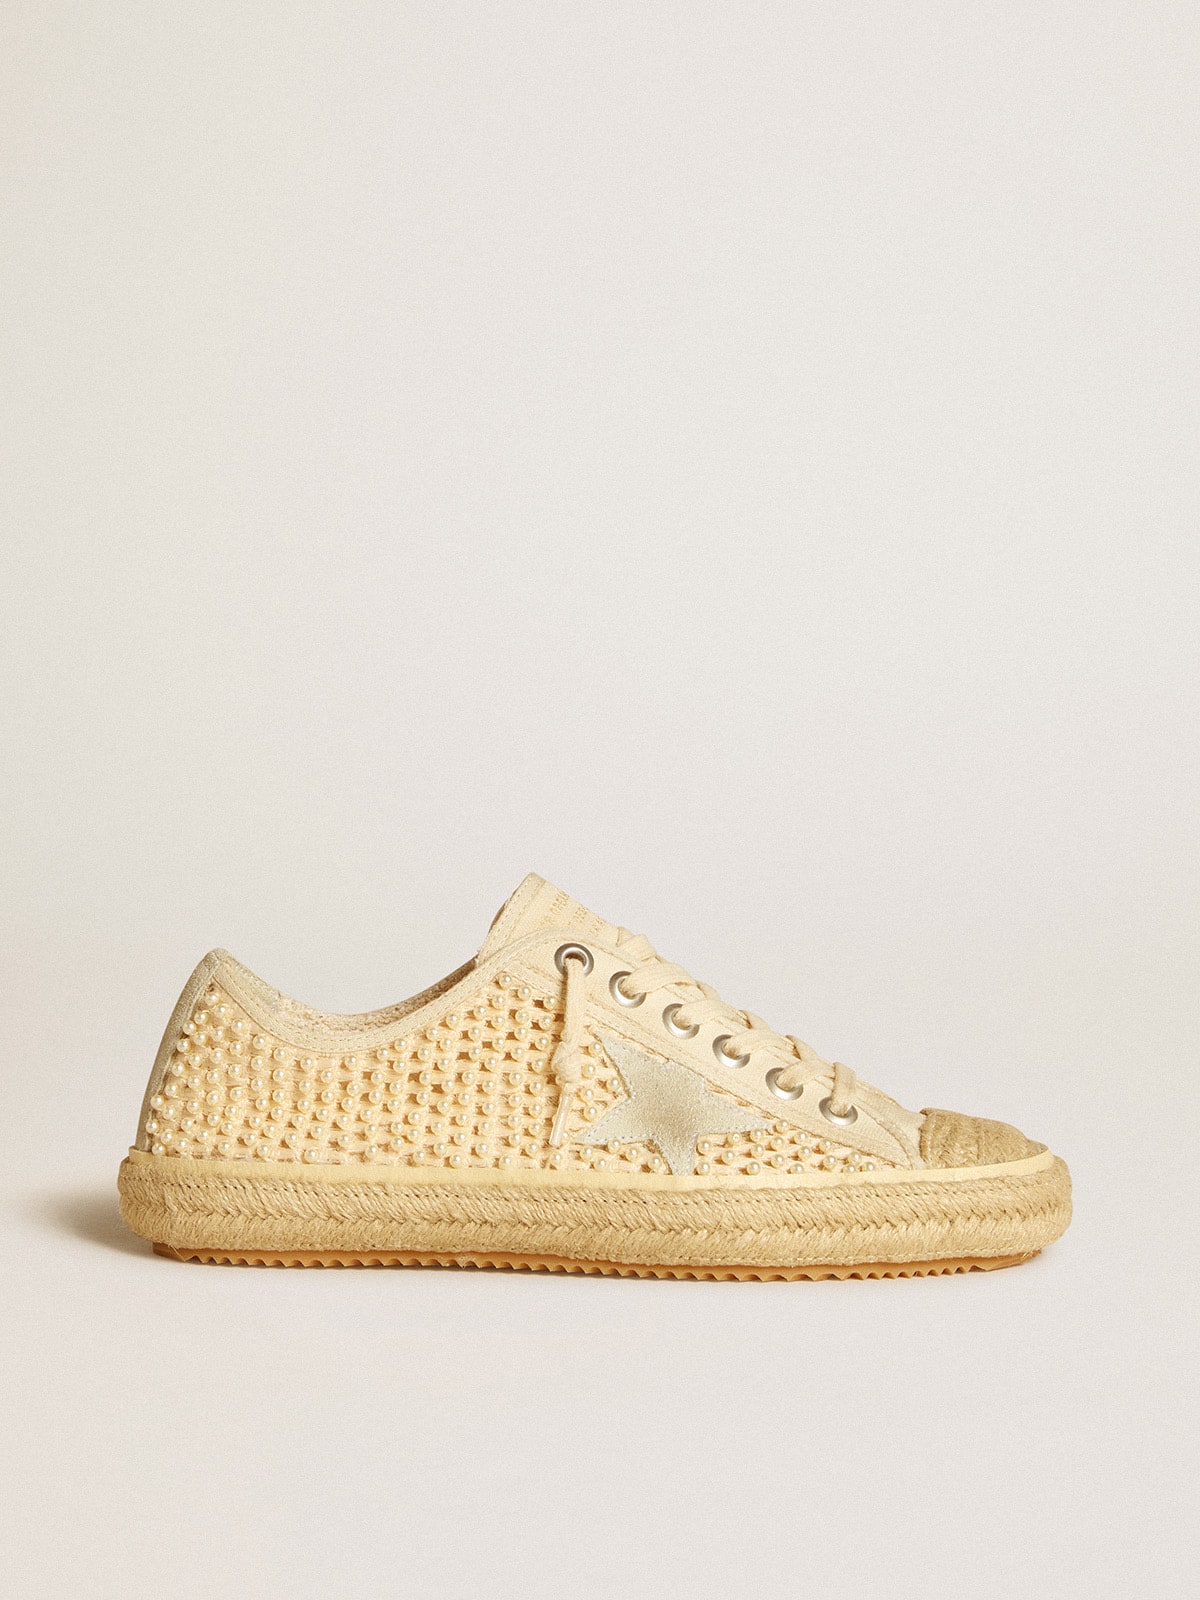 V-Star in canvas with all-over pearls and raffia | Golden Goose